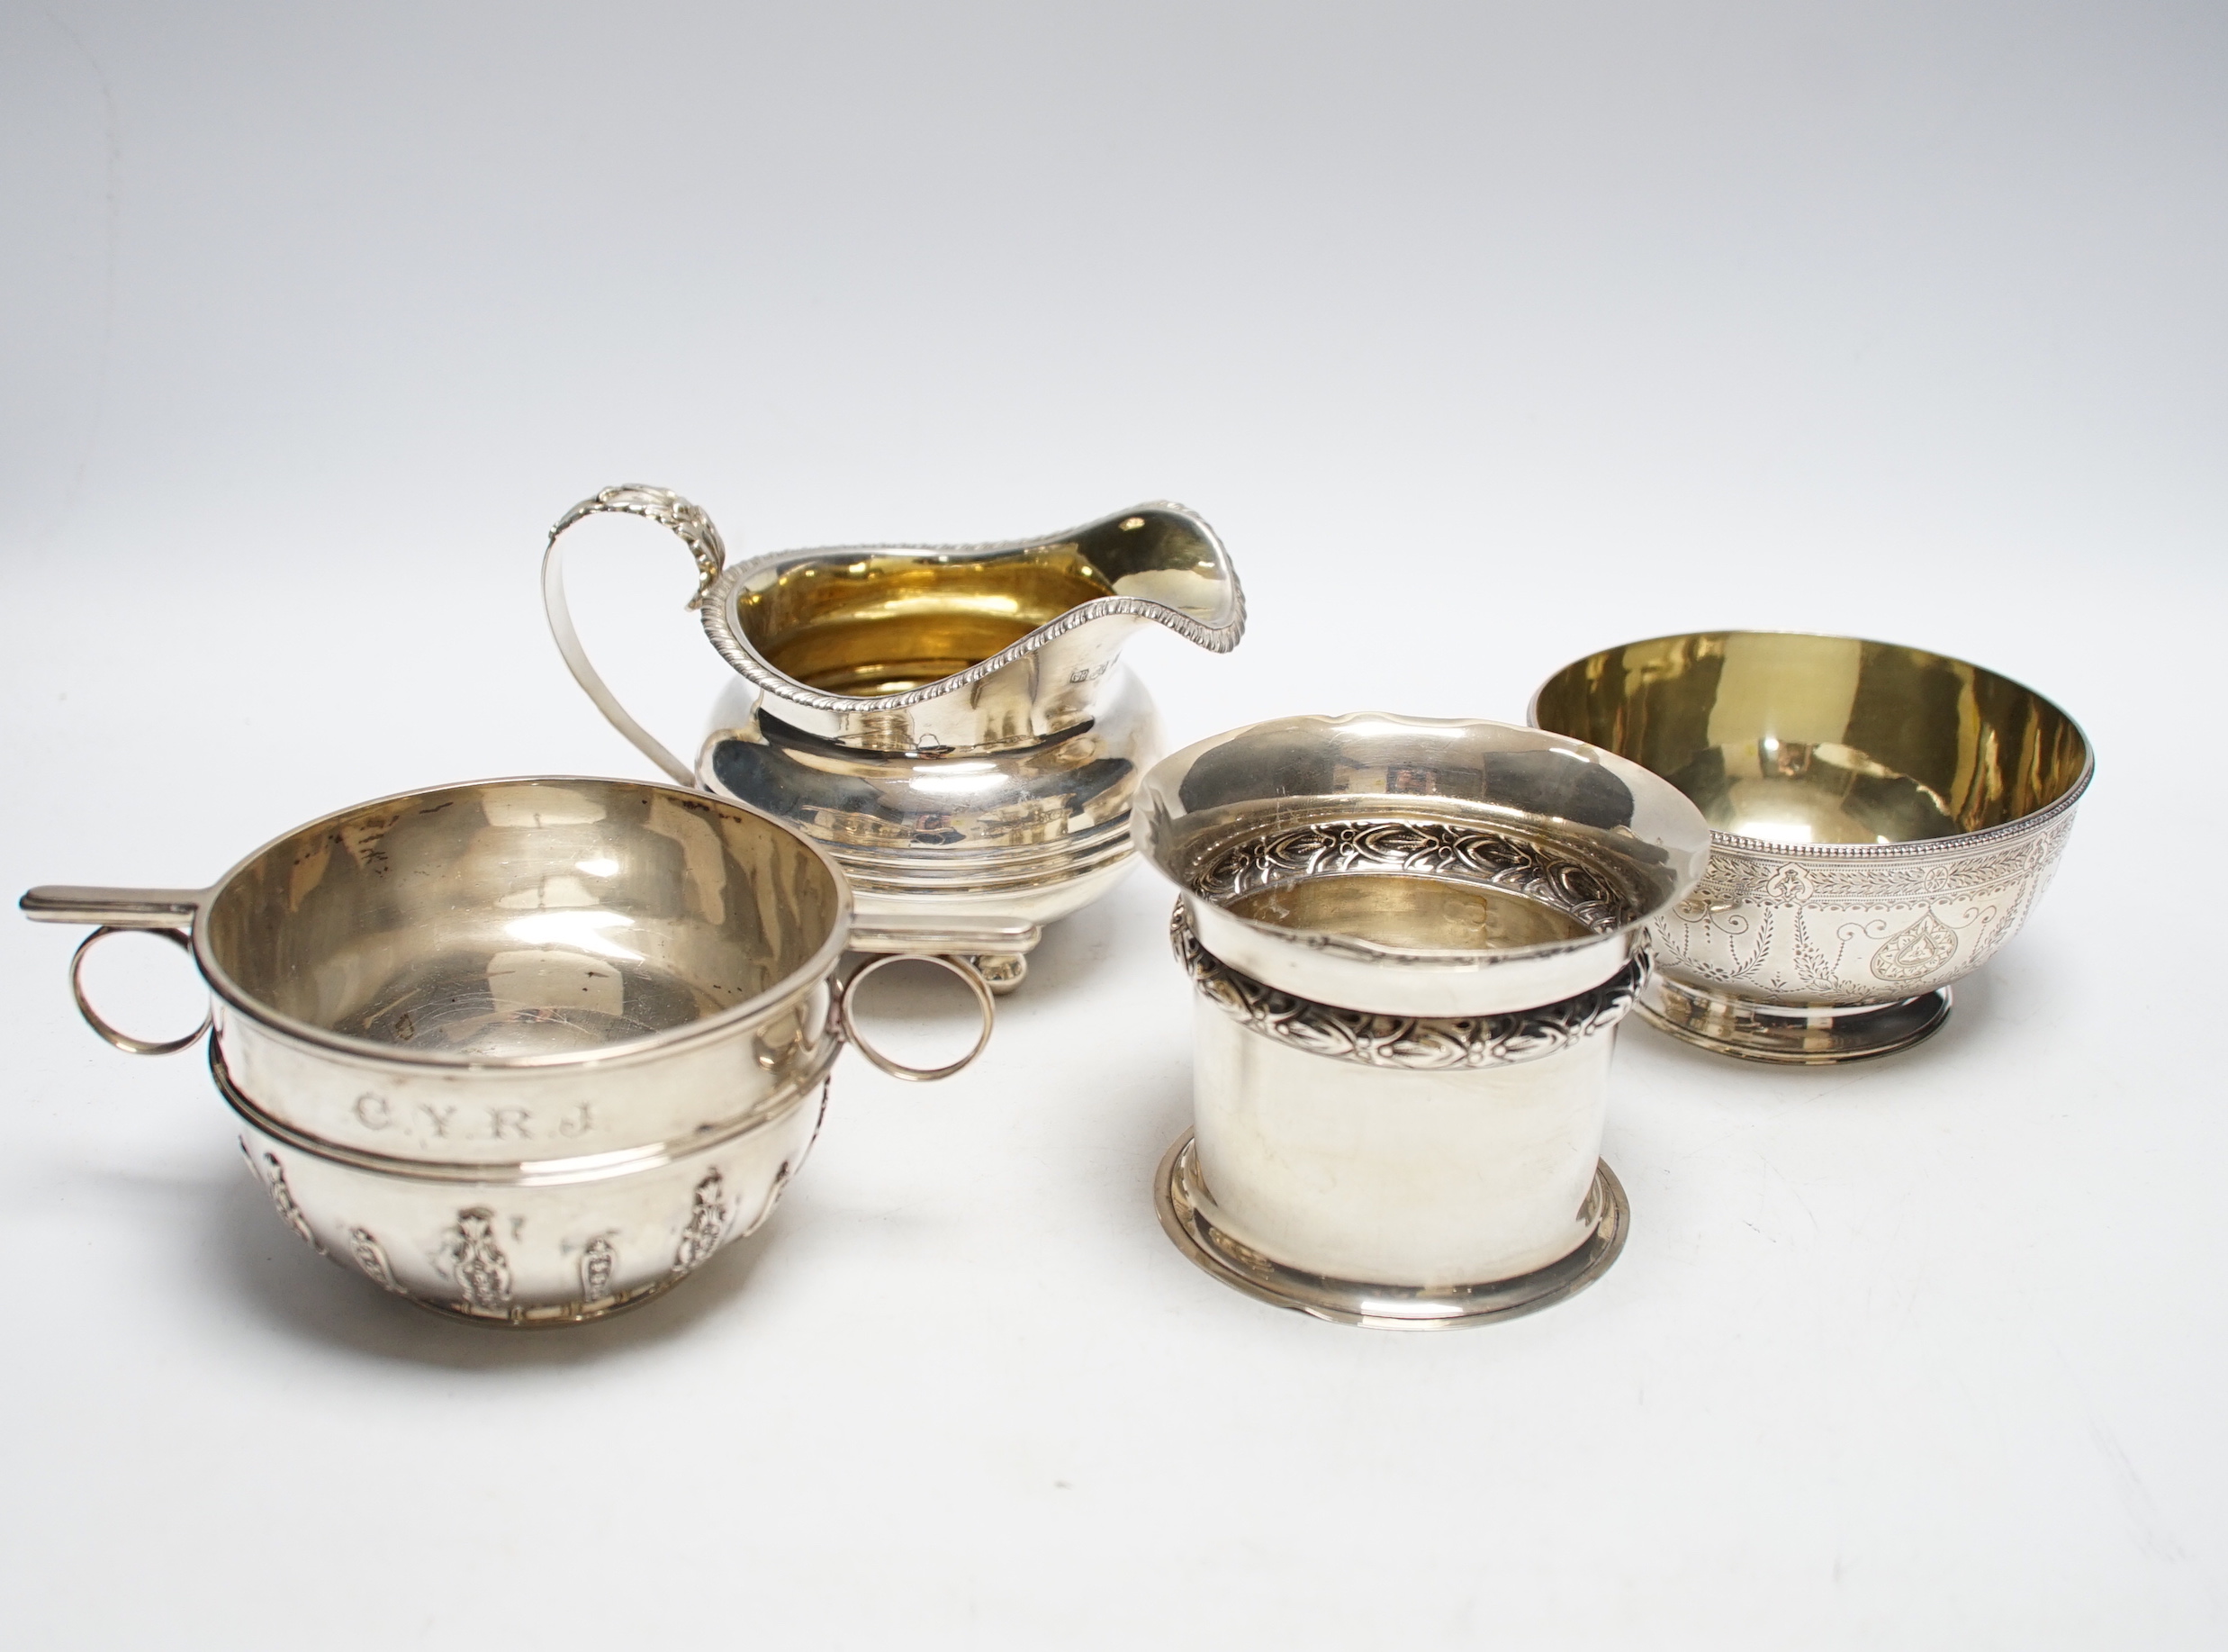 Two silver sugar bowls, London, 1877 and London, 1904, the latter with ring handles, diameter 10.8cm, a silver small vase and a George IV silver cream jug, 21.9oz.